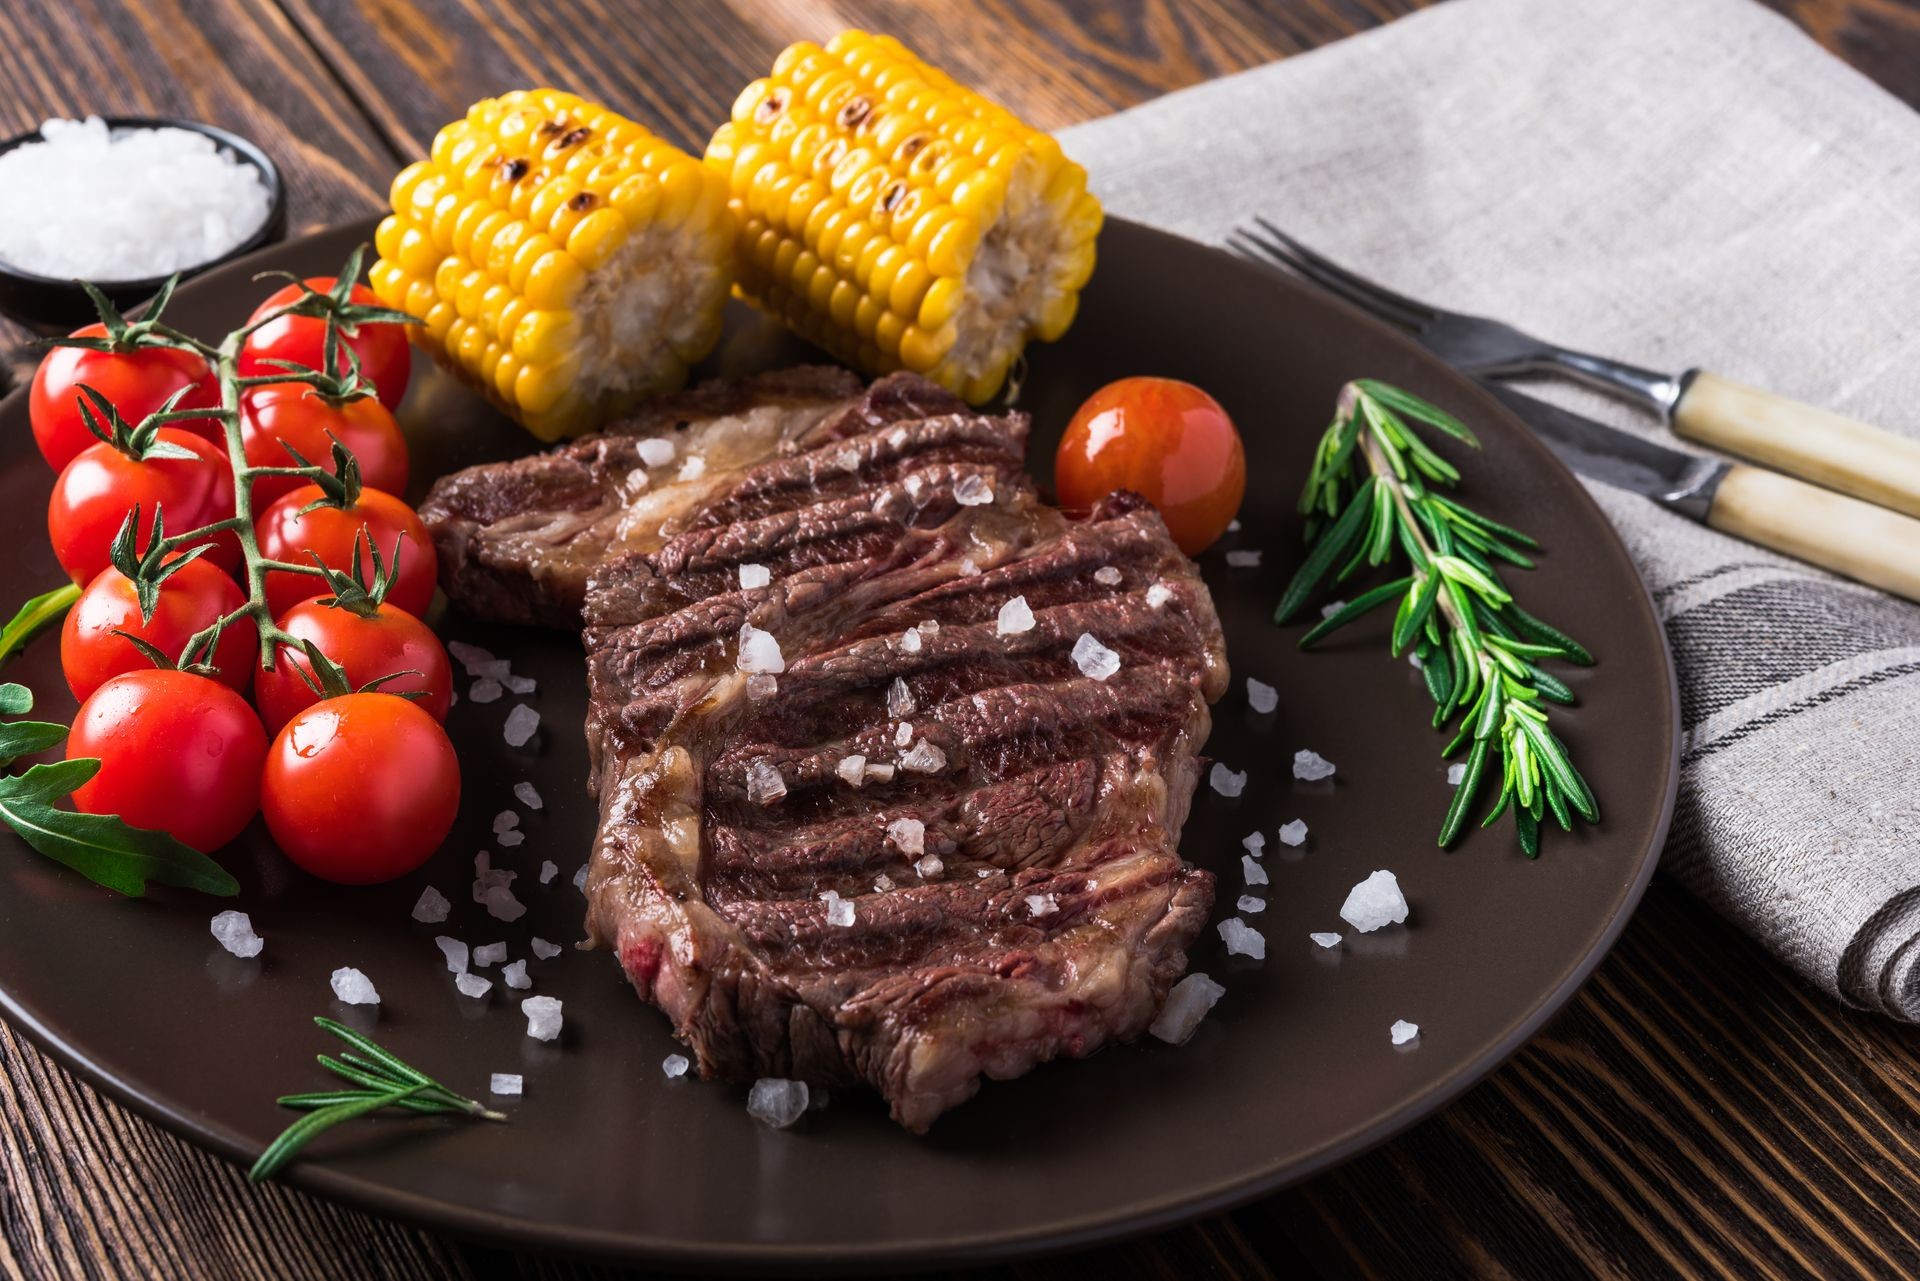 Grilled beef steak ribeye with cherry tomatoes, rosemary and corn on wooden background